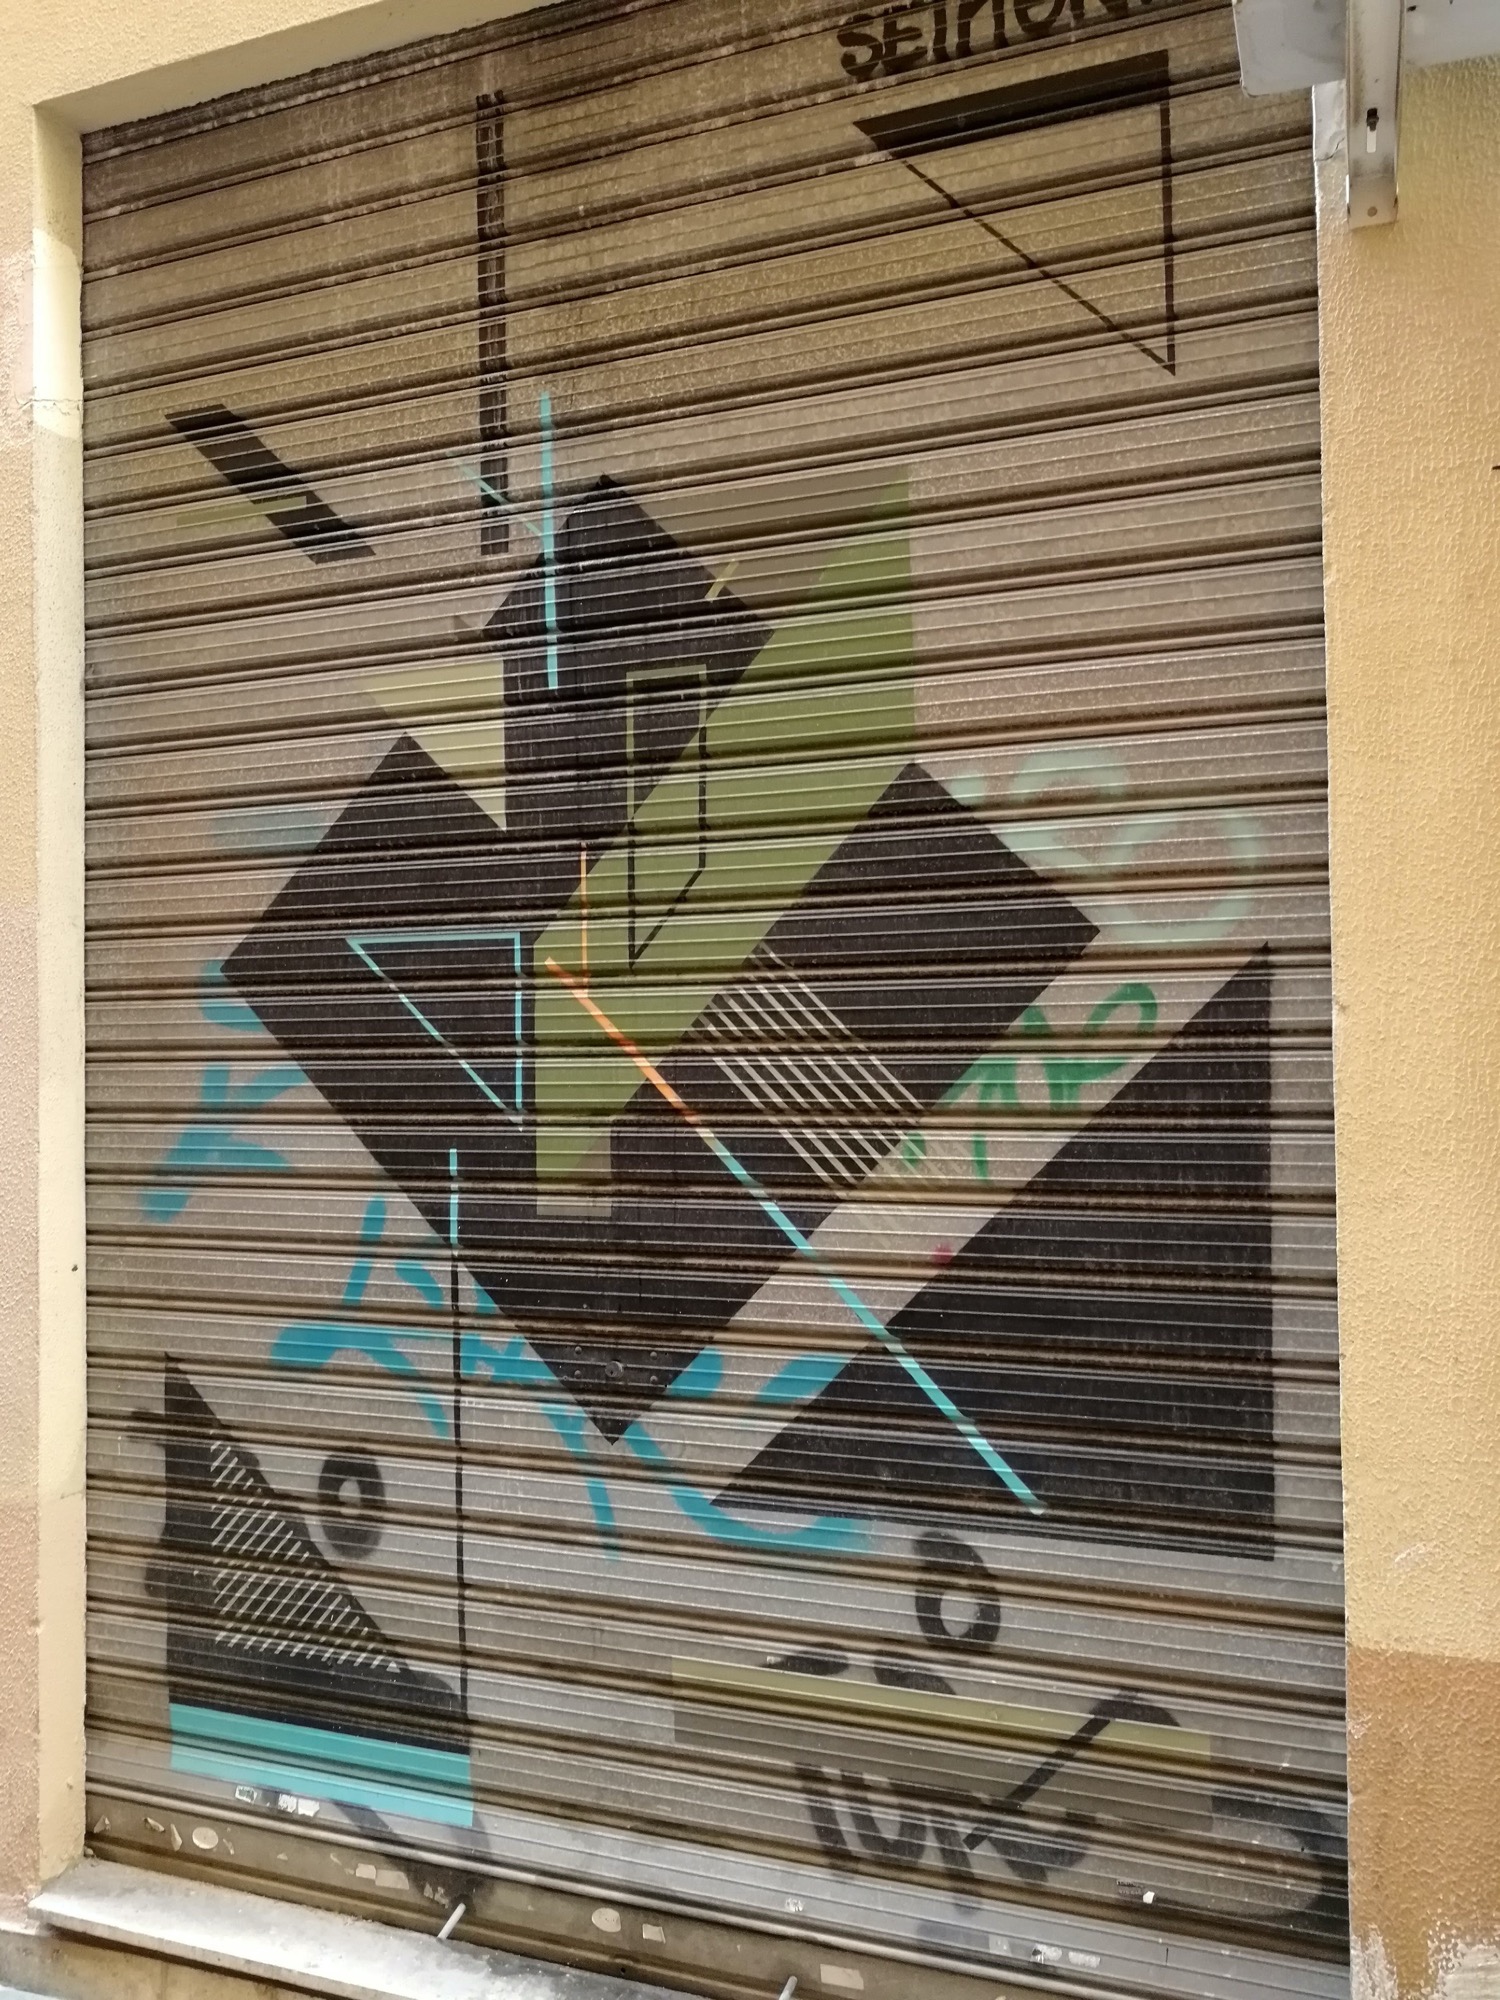 Graffiti 3305  captured by Rabot in València Spain